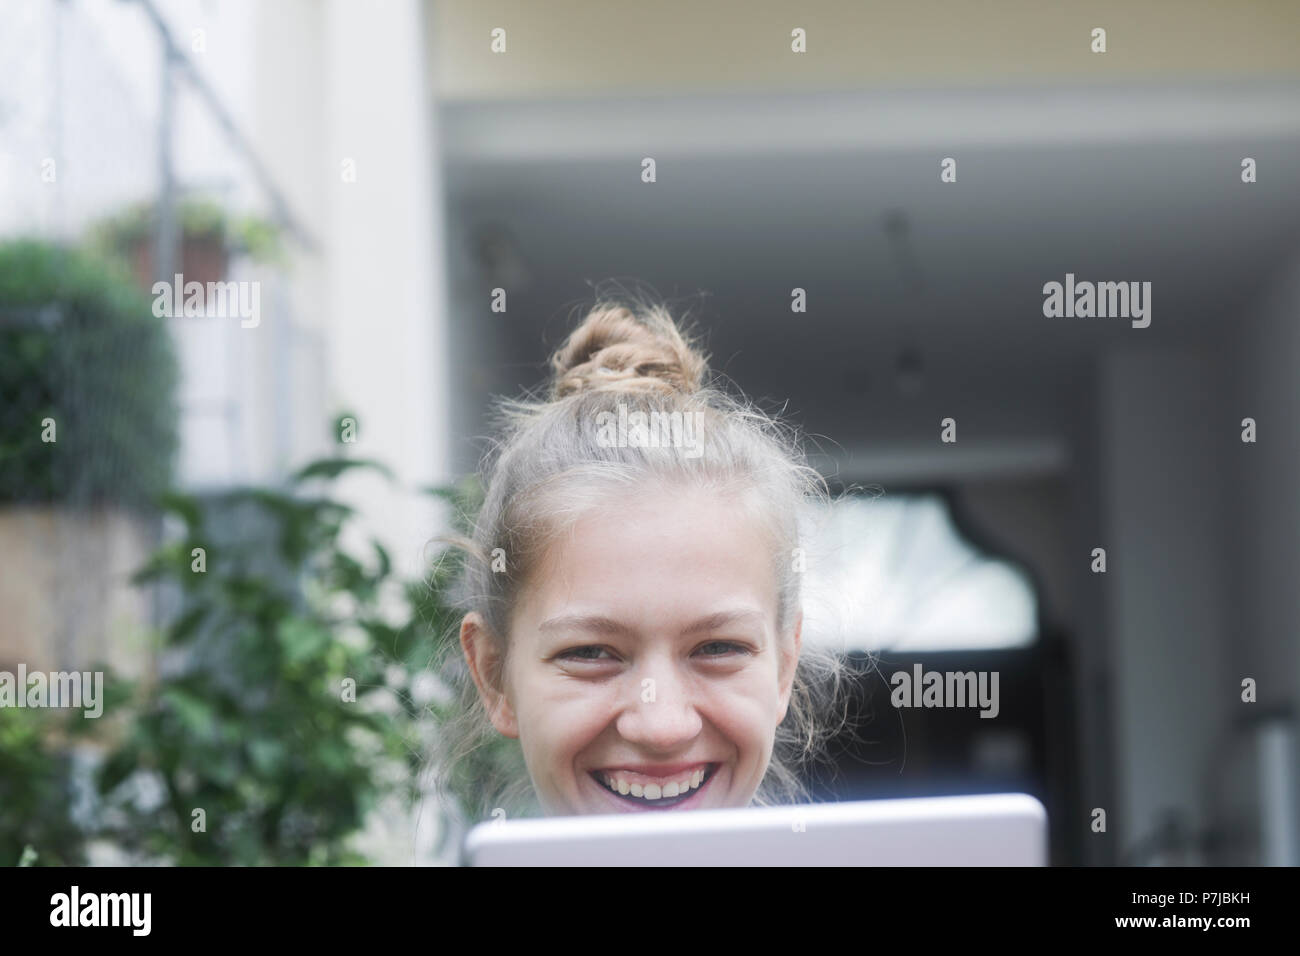 Smiling woman sitting outdoors using a digital tablet Banque D'Images